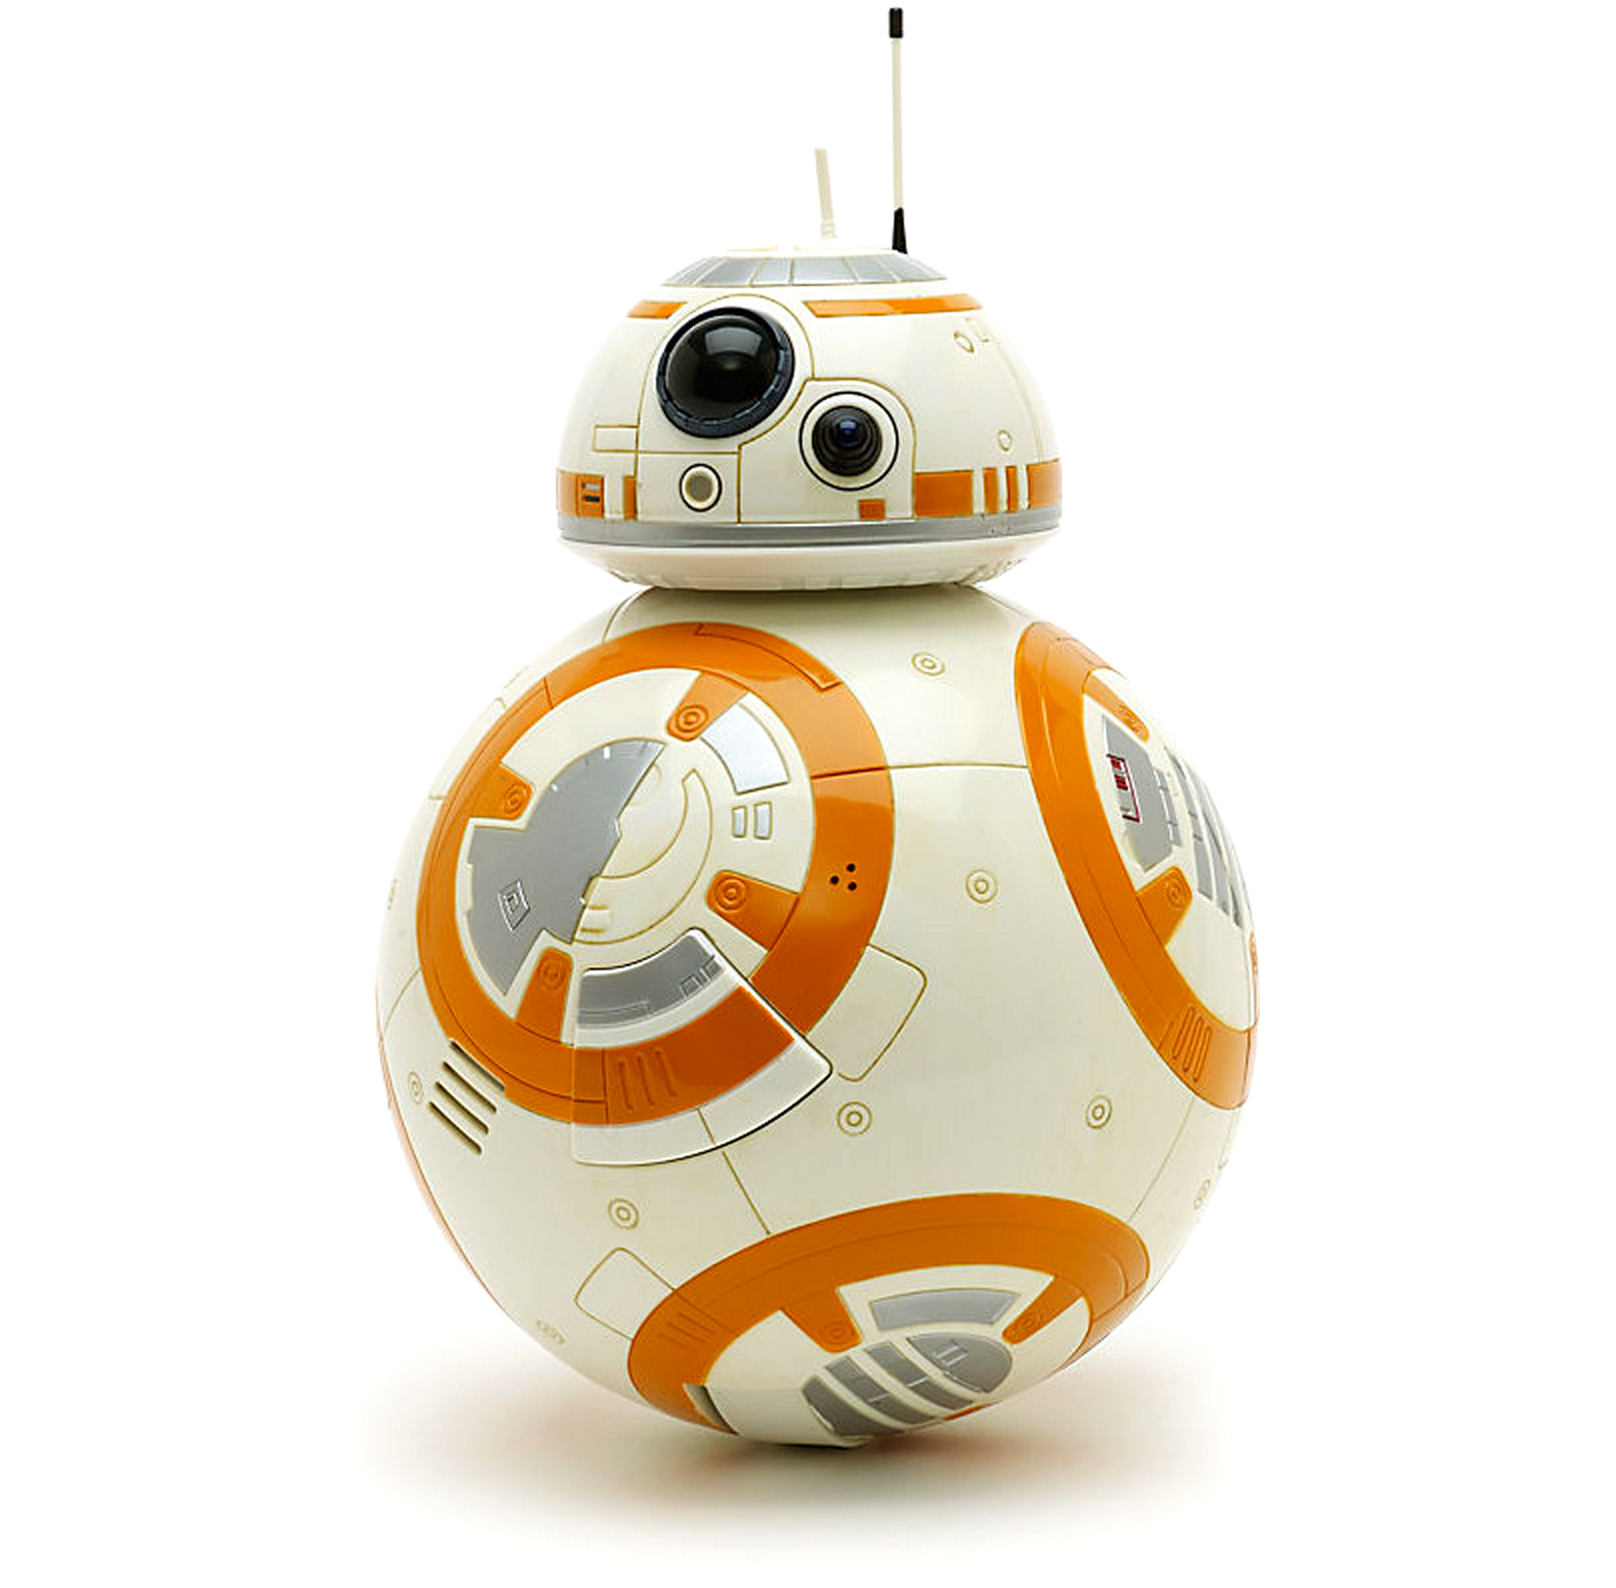 It Turns Out There’s A Much Cheaper Interactive BB-8 That Rolls And Talks Too